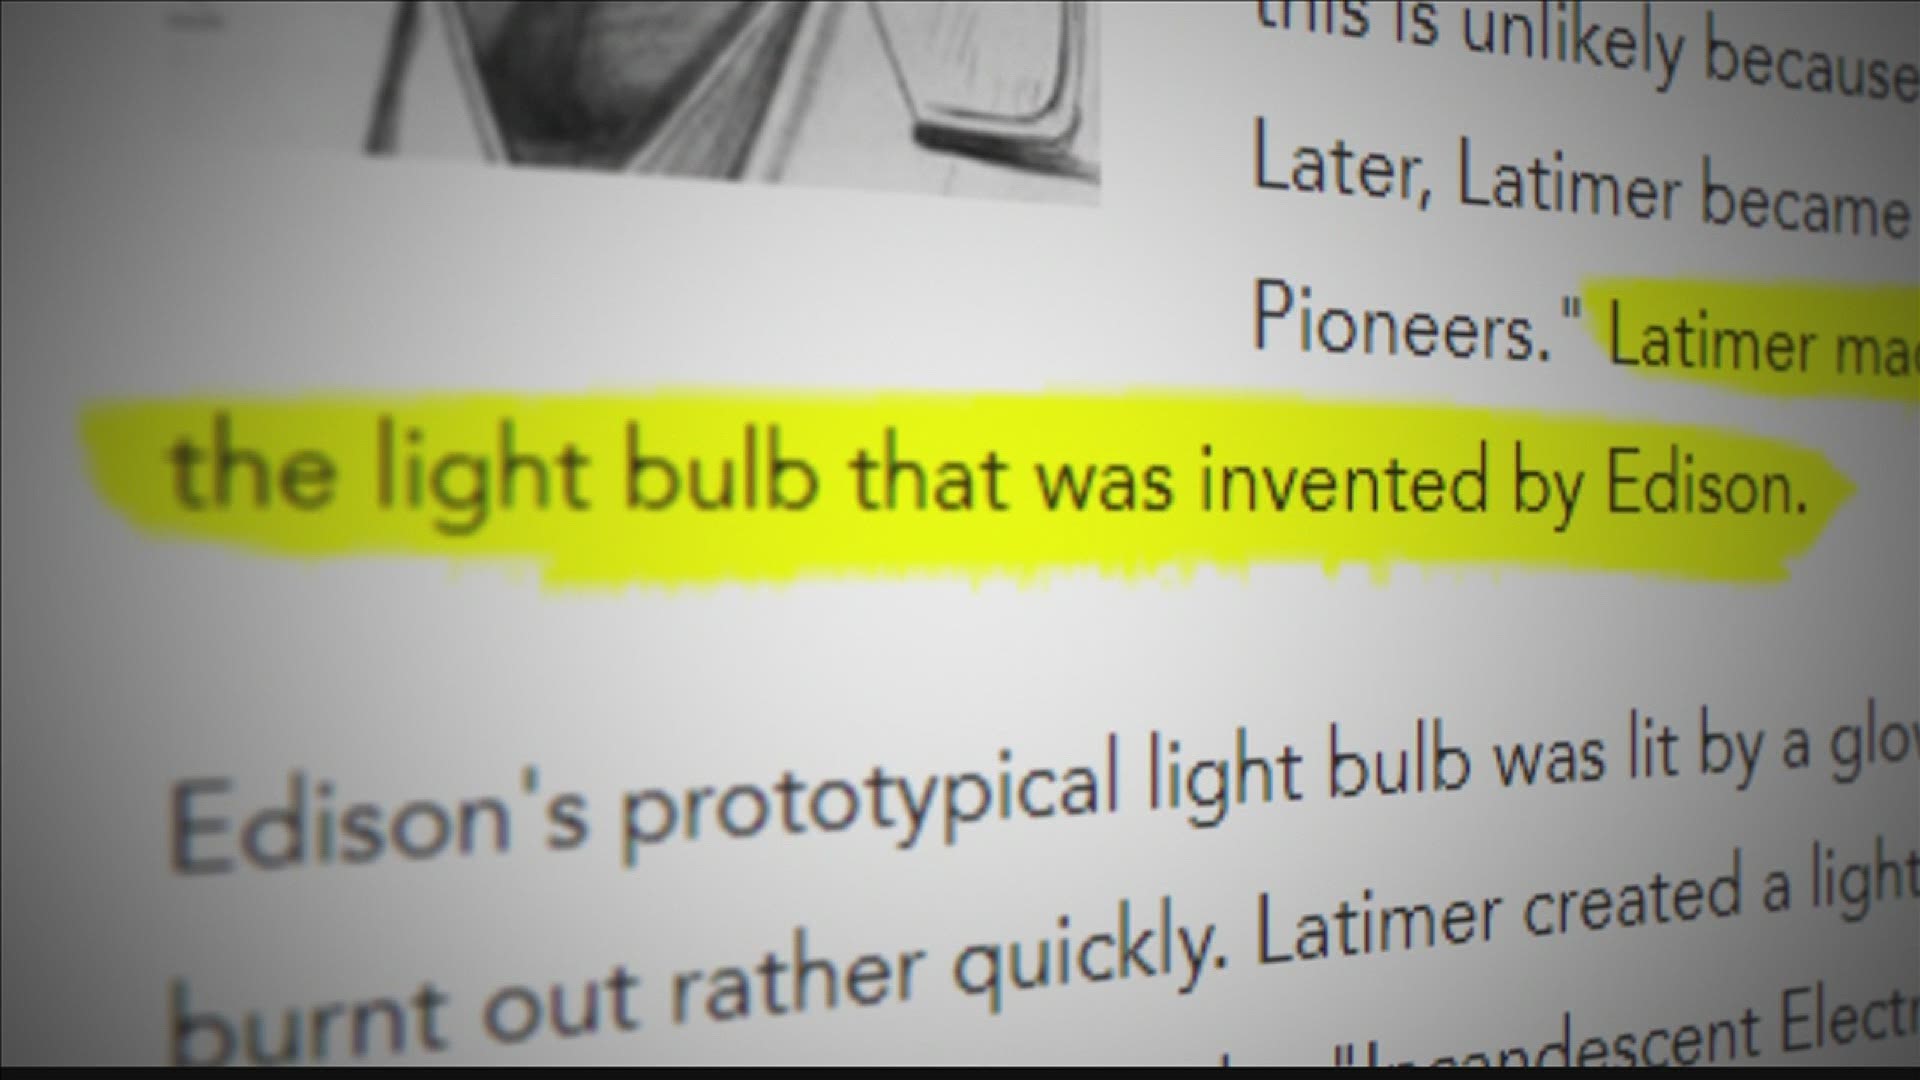 The VERIFY team looked into the claim that a Black man invented the light bulb.